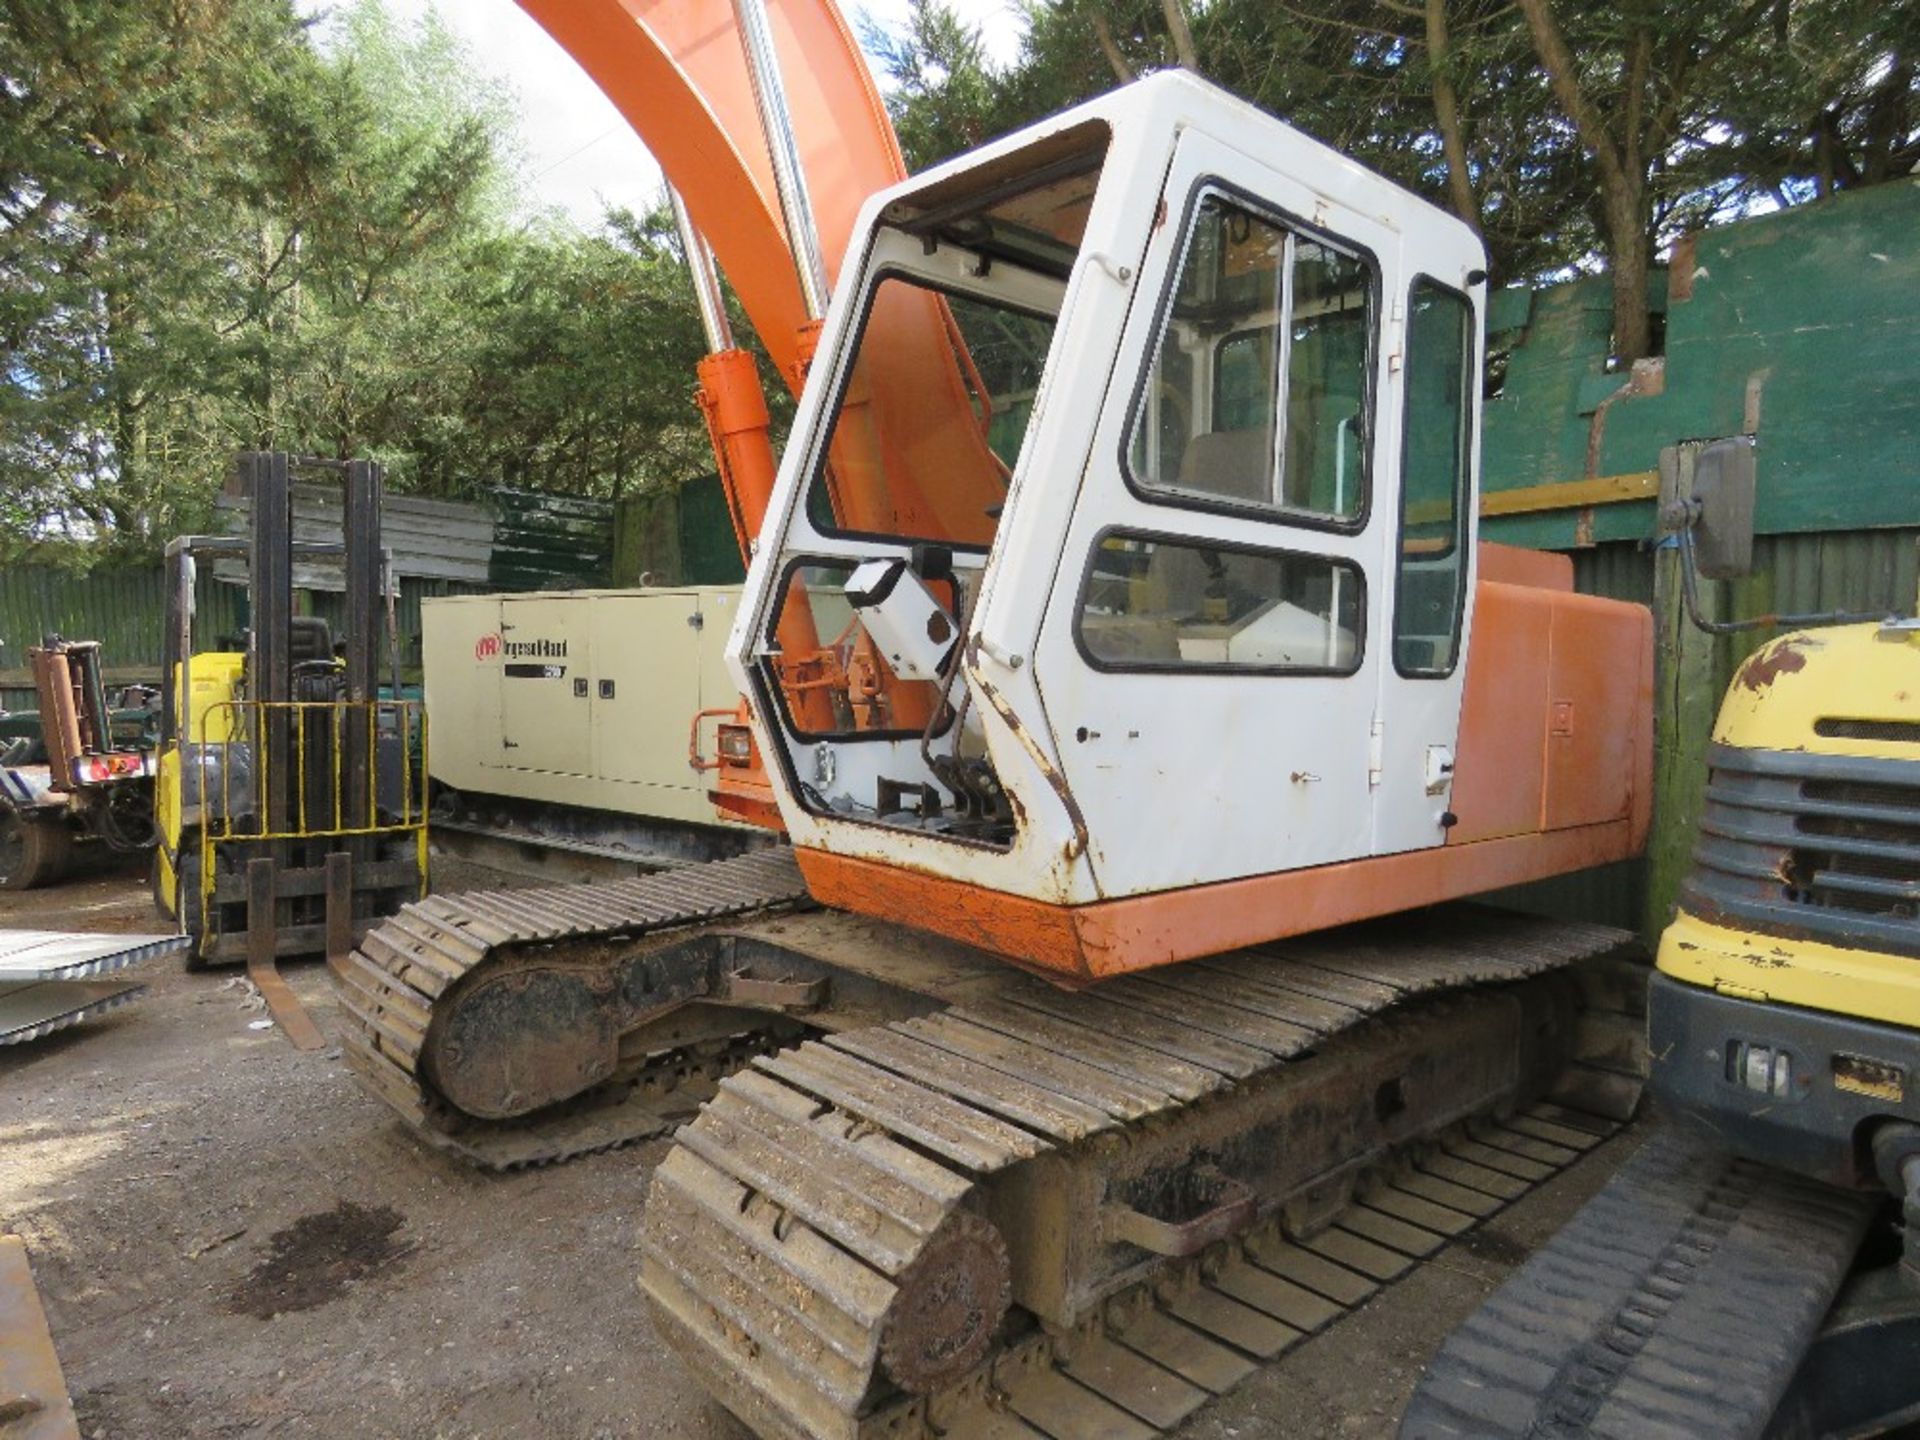 DAEWOO 13TONNE STEEL TRACKED EXCAVATOR WITH 3 X BUCKETS. STRAIGHT FROM A LONG RUNNING PRIVATE HOUSE